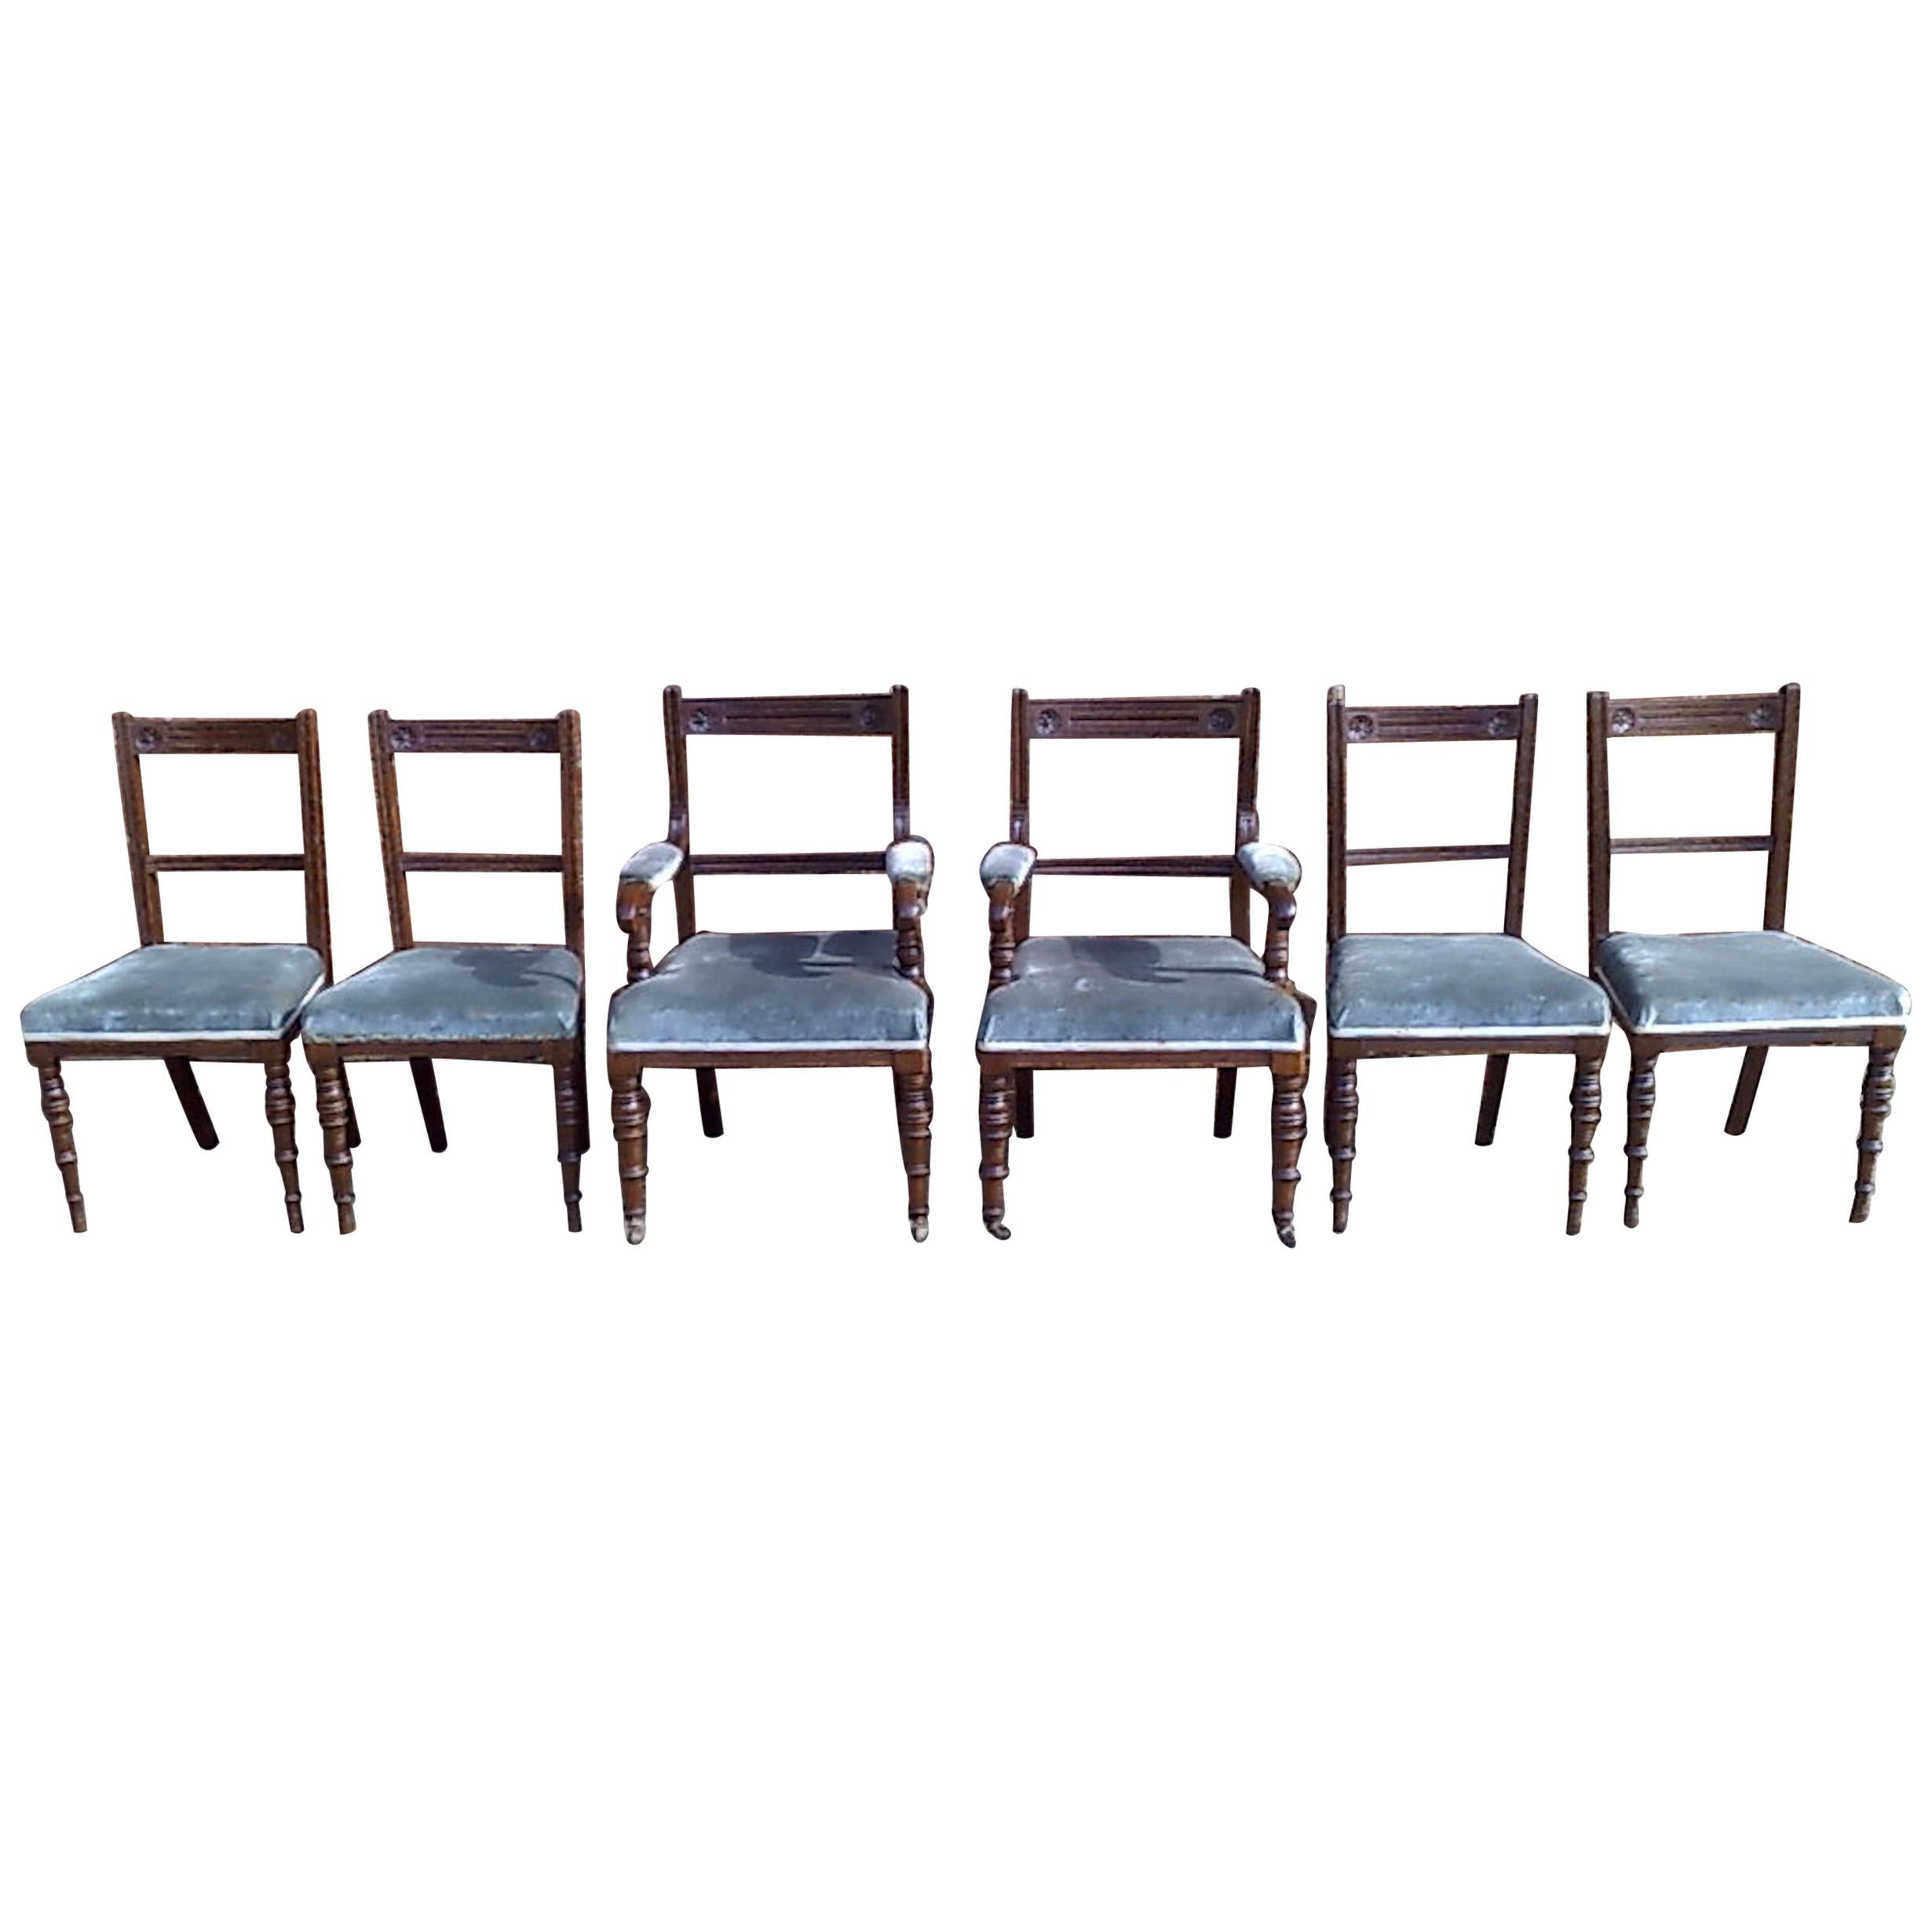 Bruce Talbert Attri Six Aesthetic Movement Oak Dining Chairs with Carved Florets